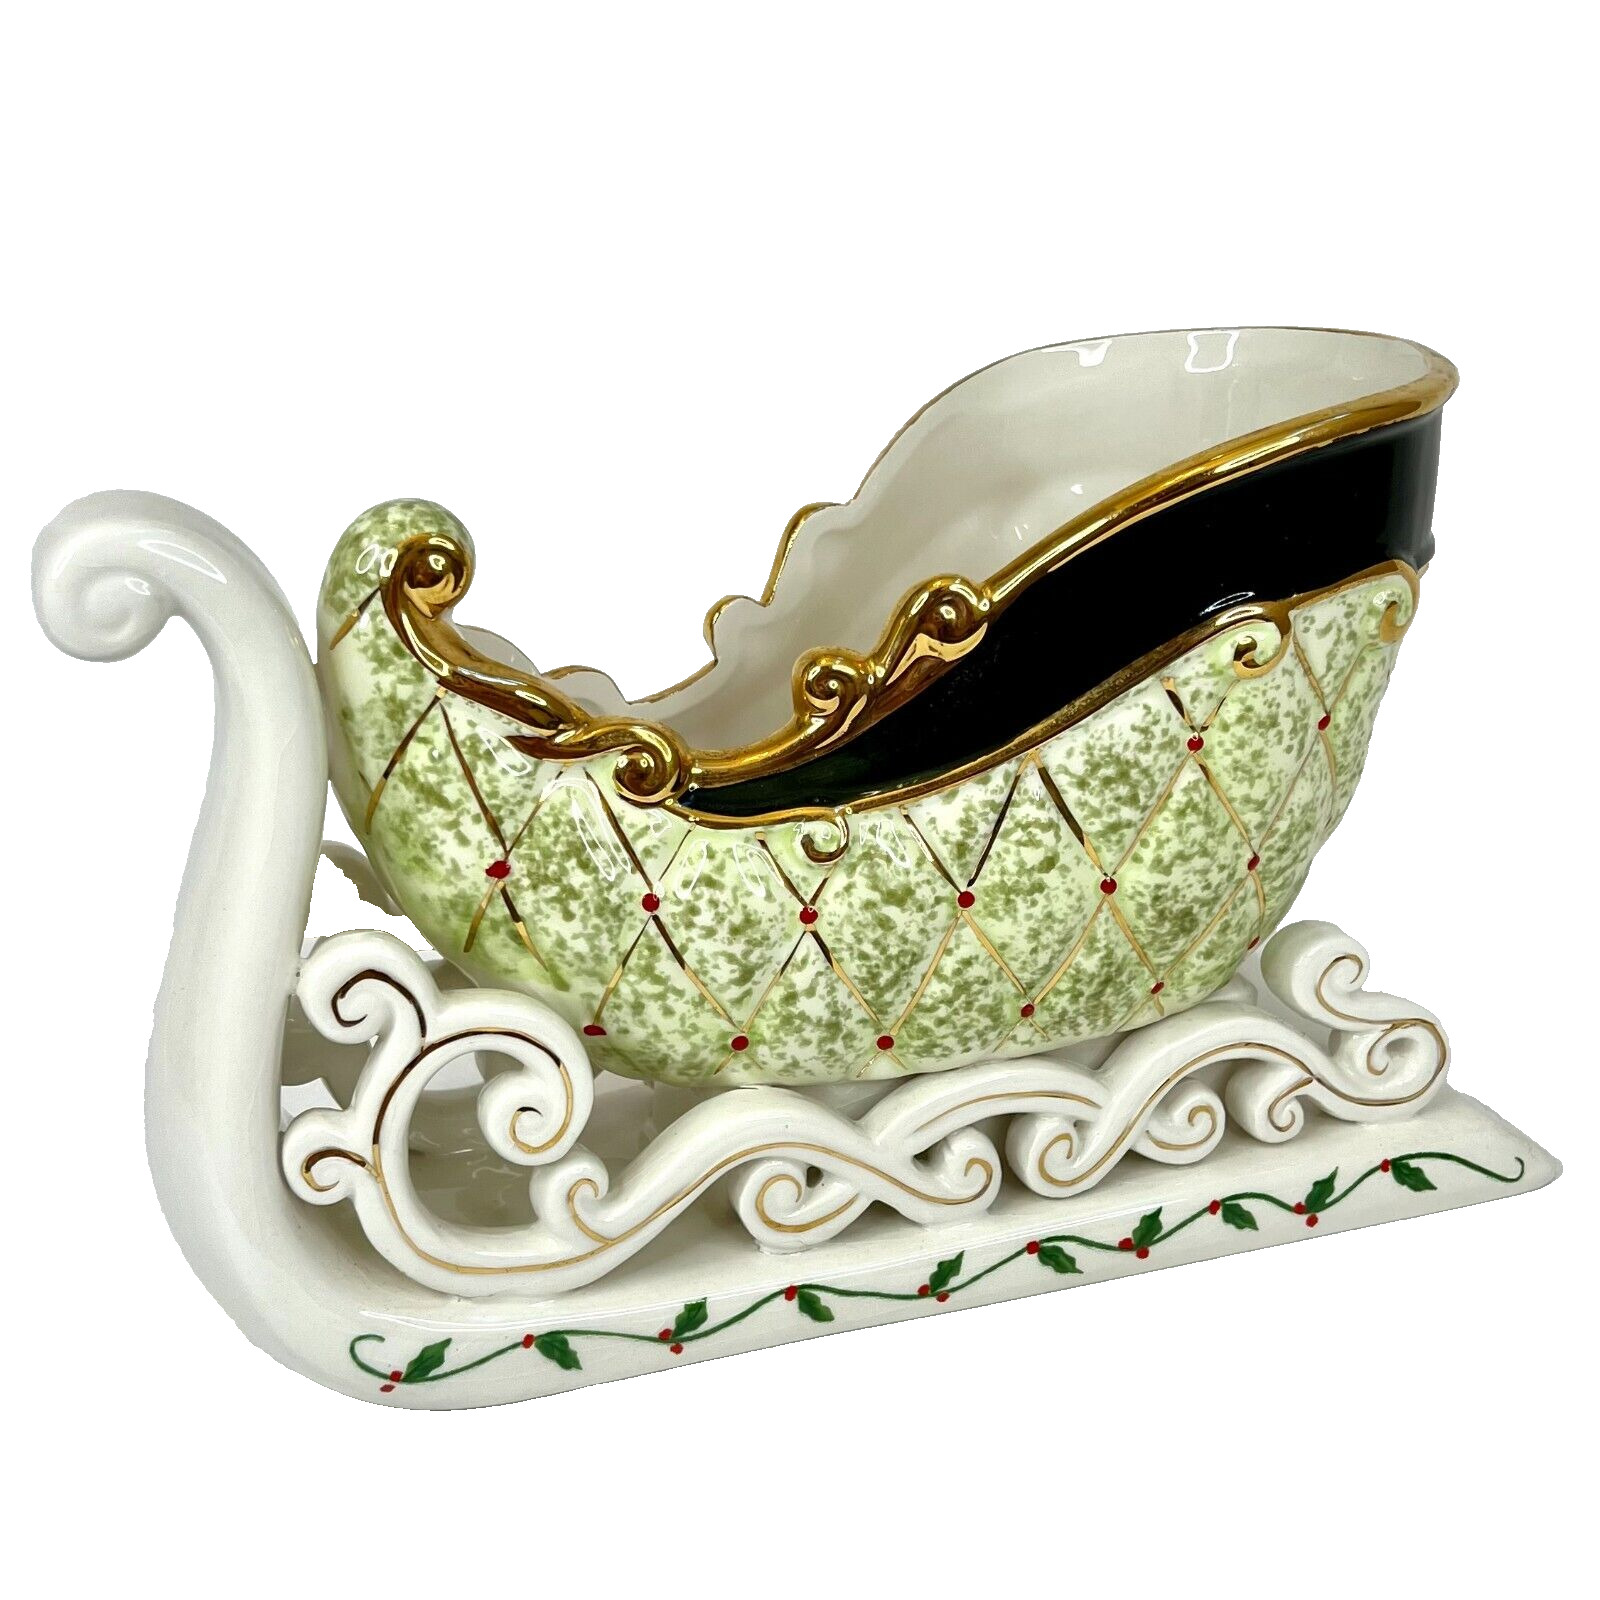 Christmas Sleigh Ceramic Green Gold White and Black with Holly Flowers Holiday